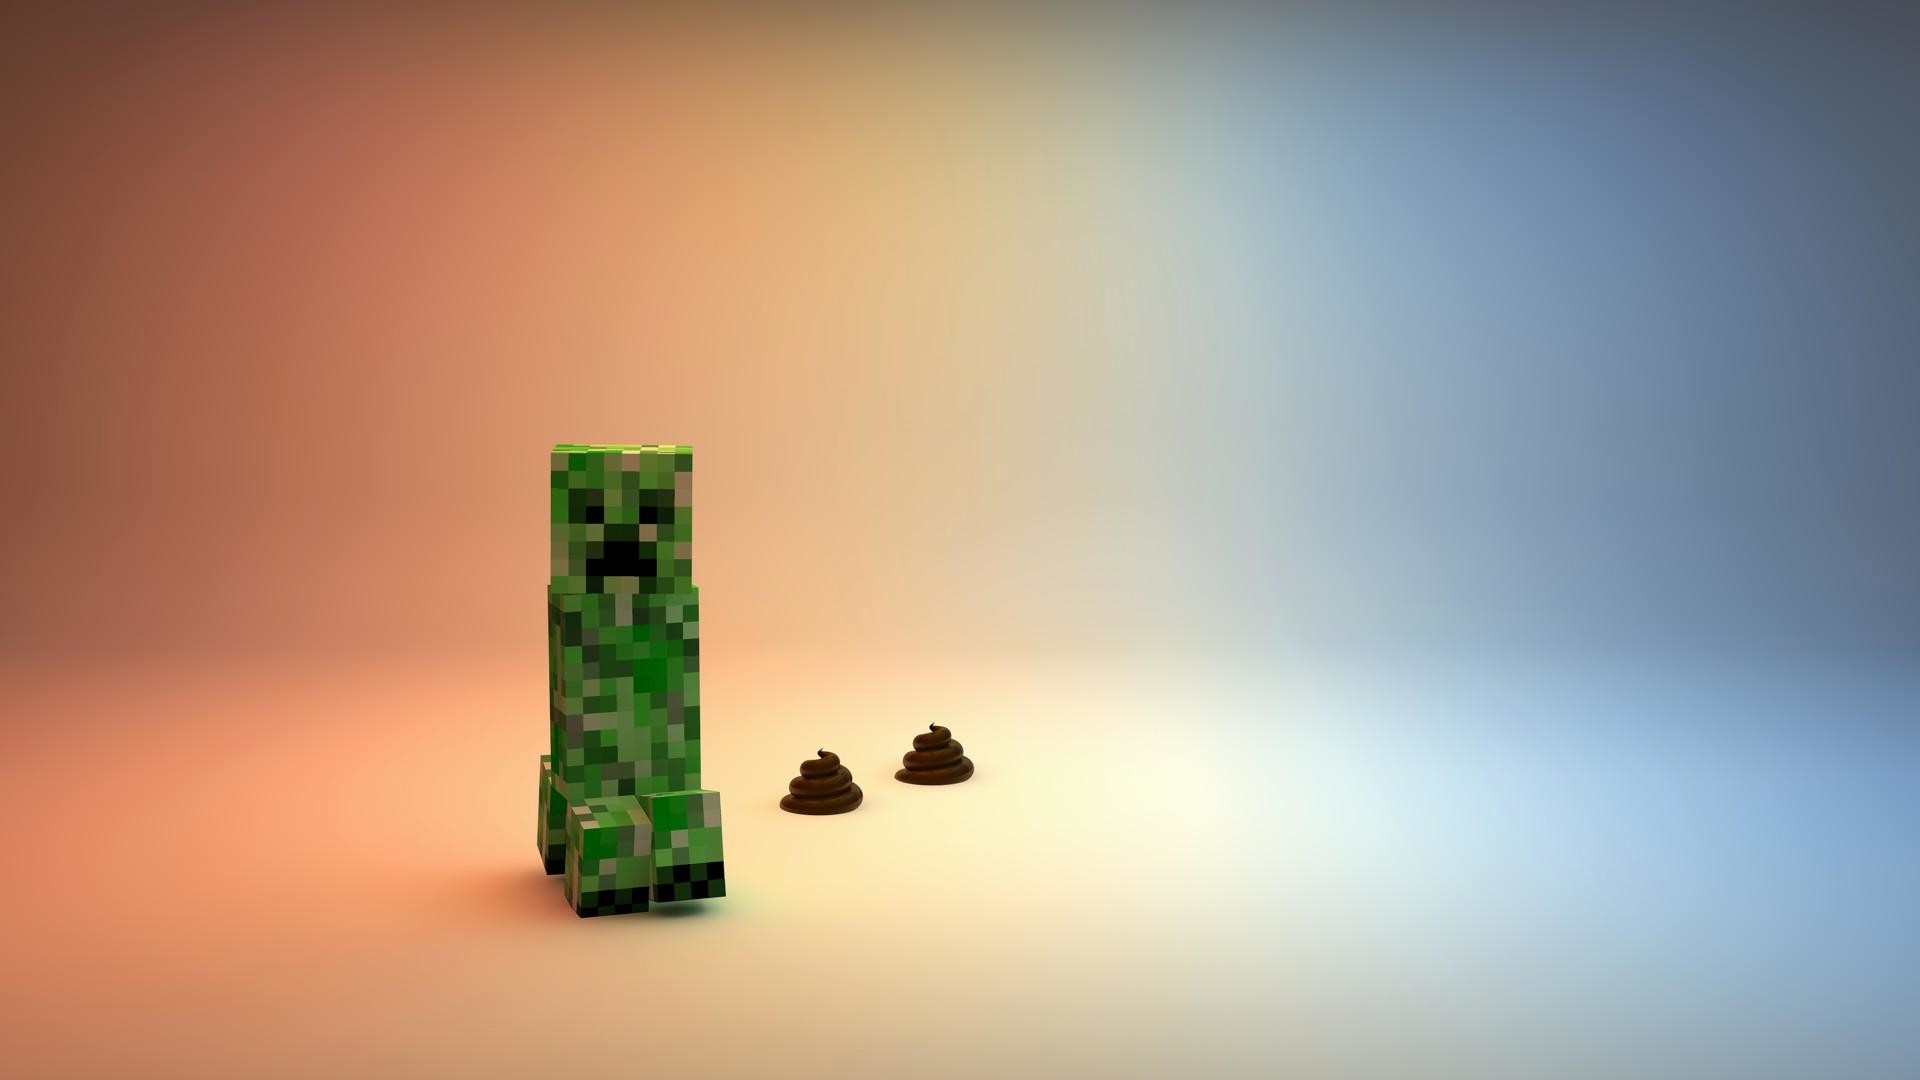 1920x1080 Awesome-minecraft-desktop-backgrounds-hd-o-wallpaper-wp6402742